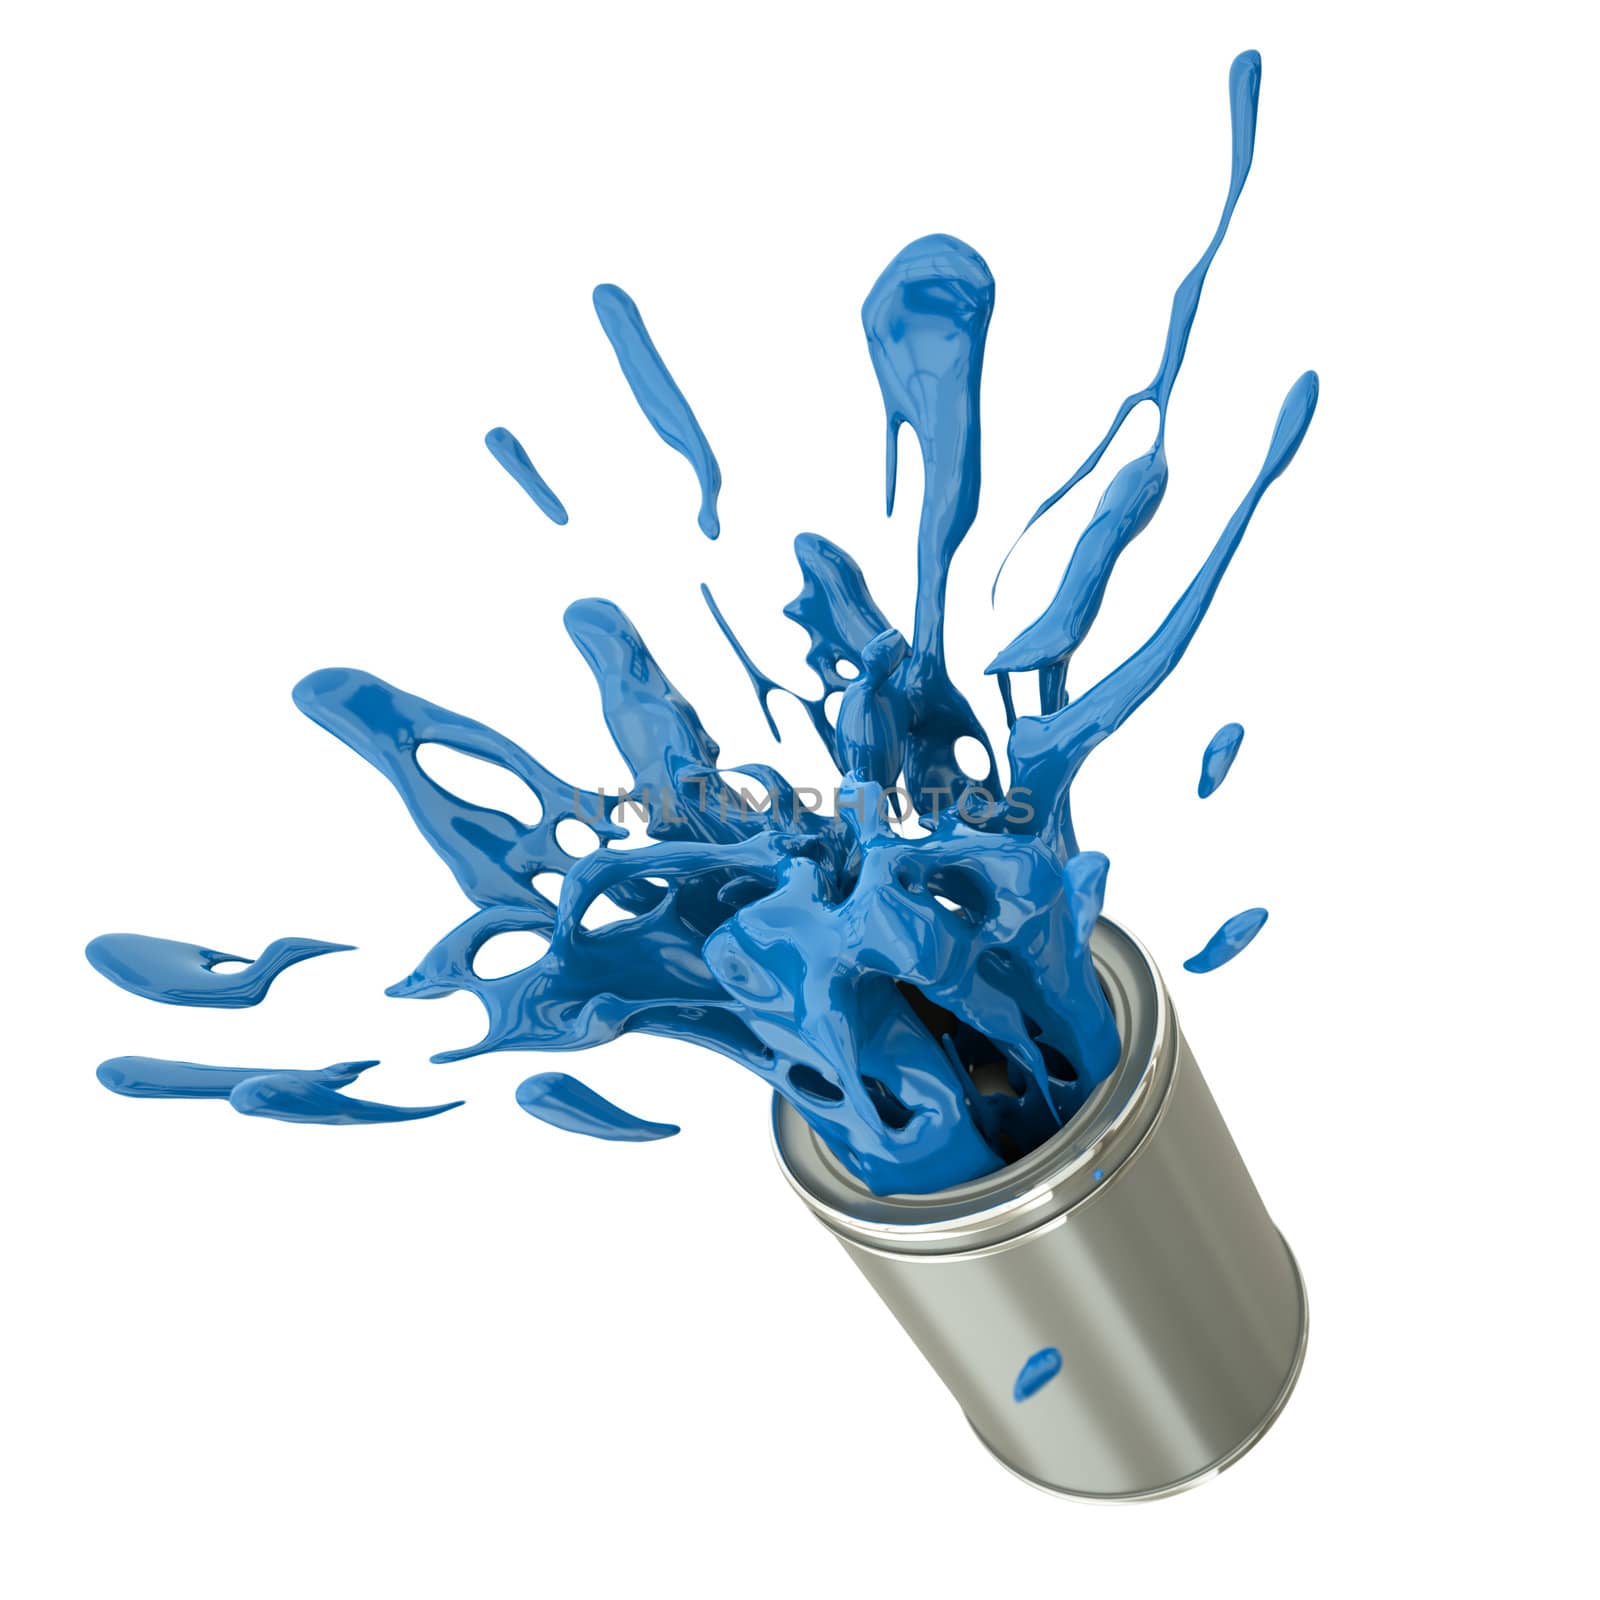 Blue paint splashing out of can. 3D render.